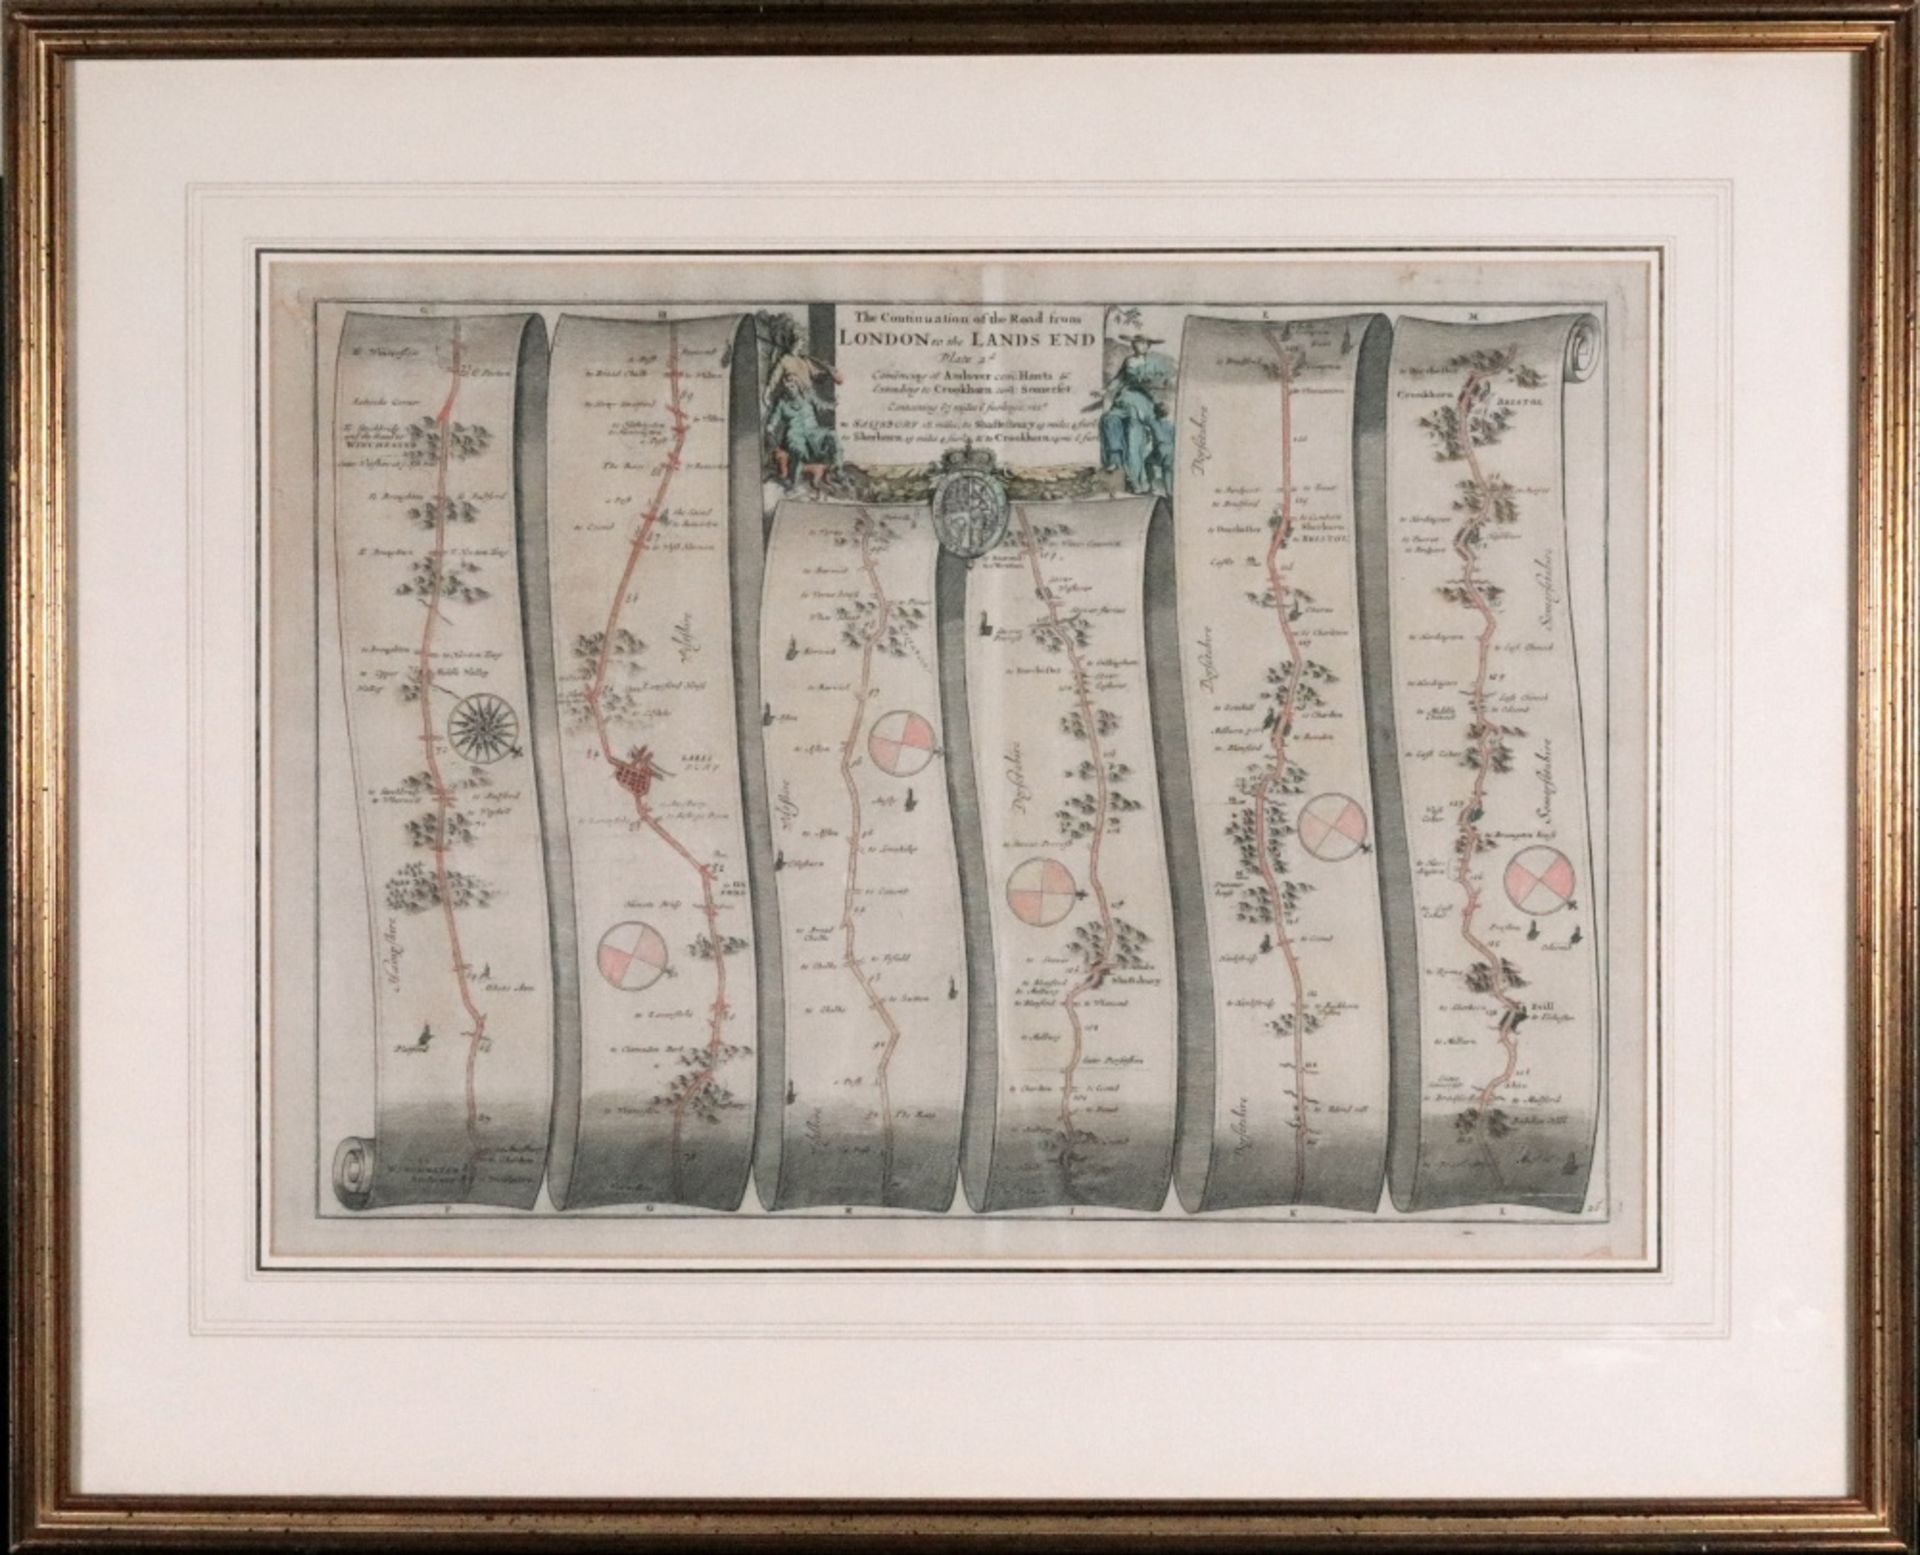 An engraved hand coloured strip map, the construction of the road from London to Lands End pate 2. - Image 2 of 2